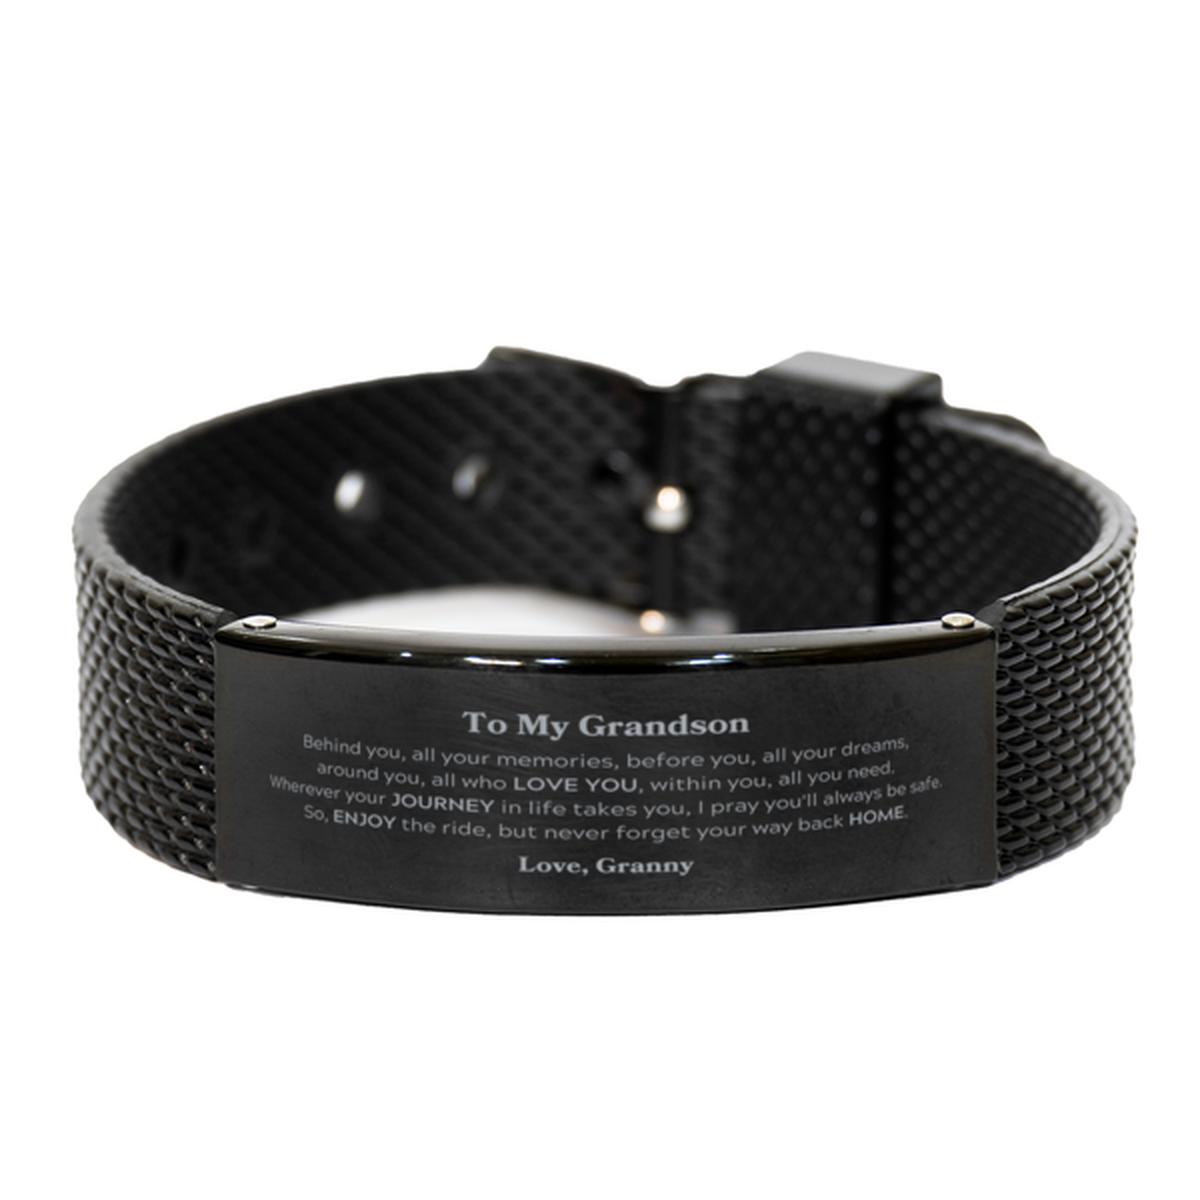 To My Grandson Graduation Gifts from Granny, Grandson Black Shark Mesh Bracelet Christmas Birthday Gifts for Grandson Behind you, all your memories, before you, all your dreams. Love, Granny